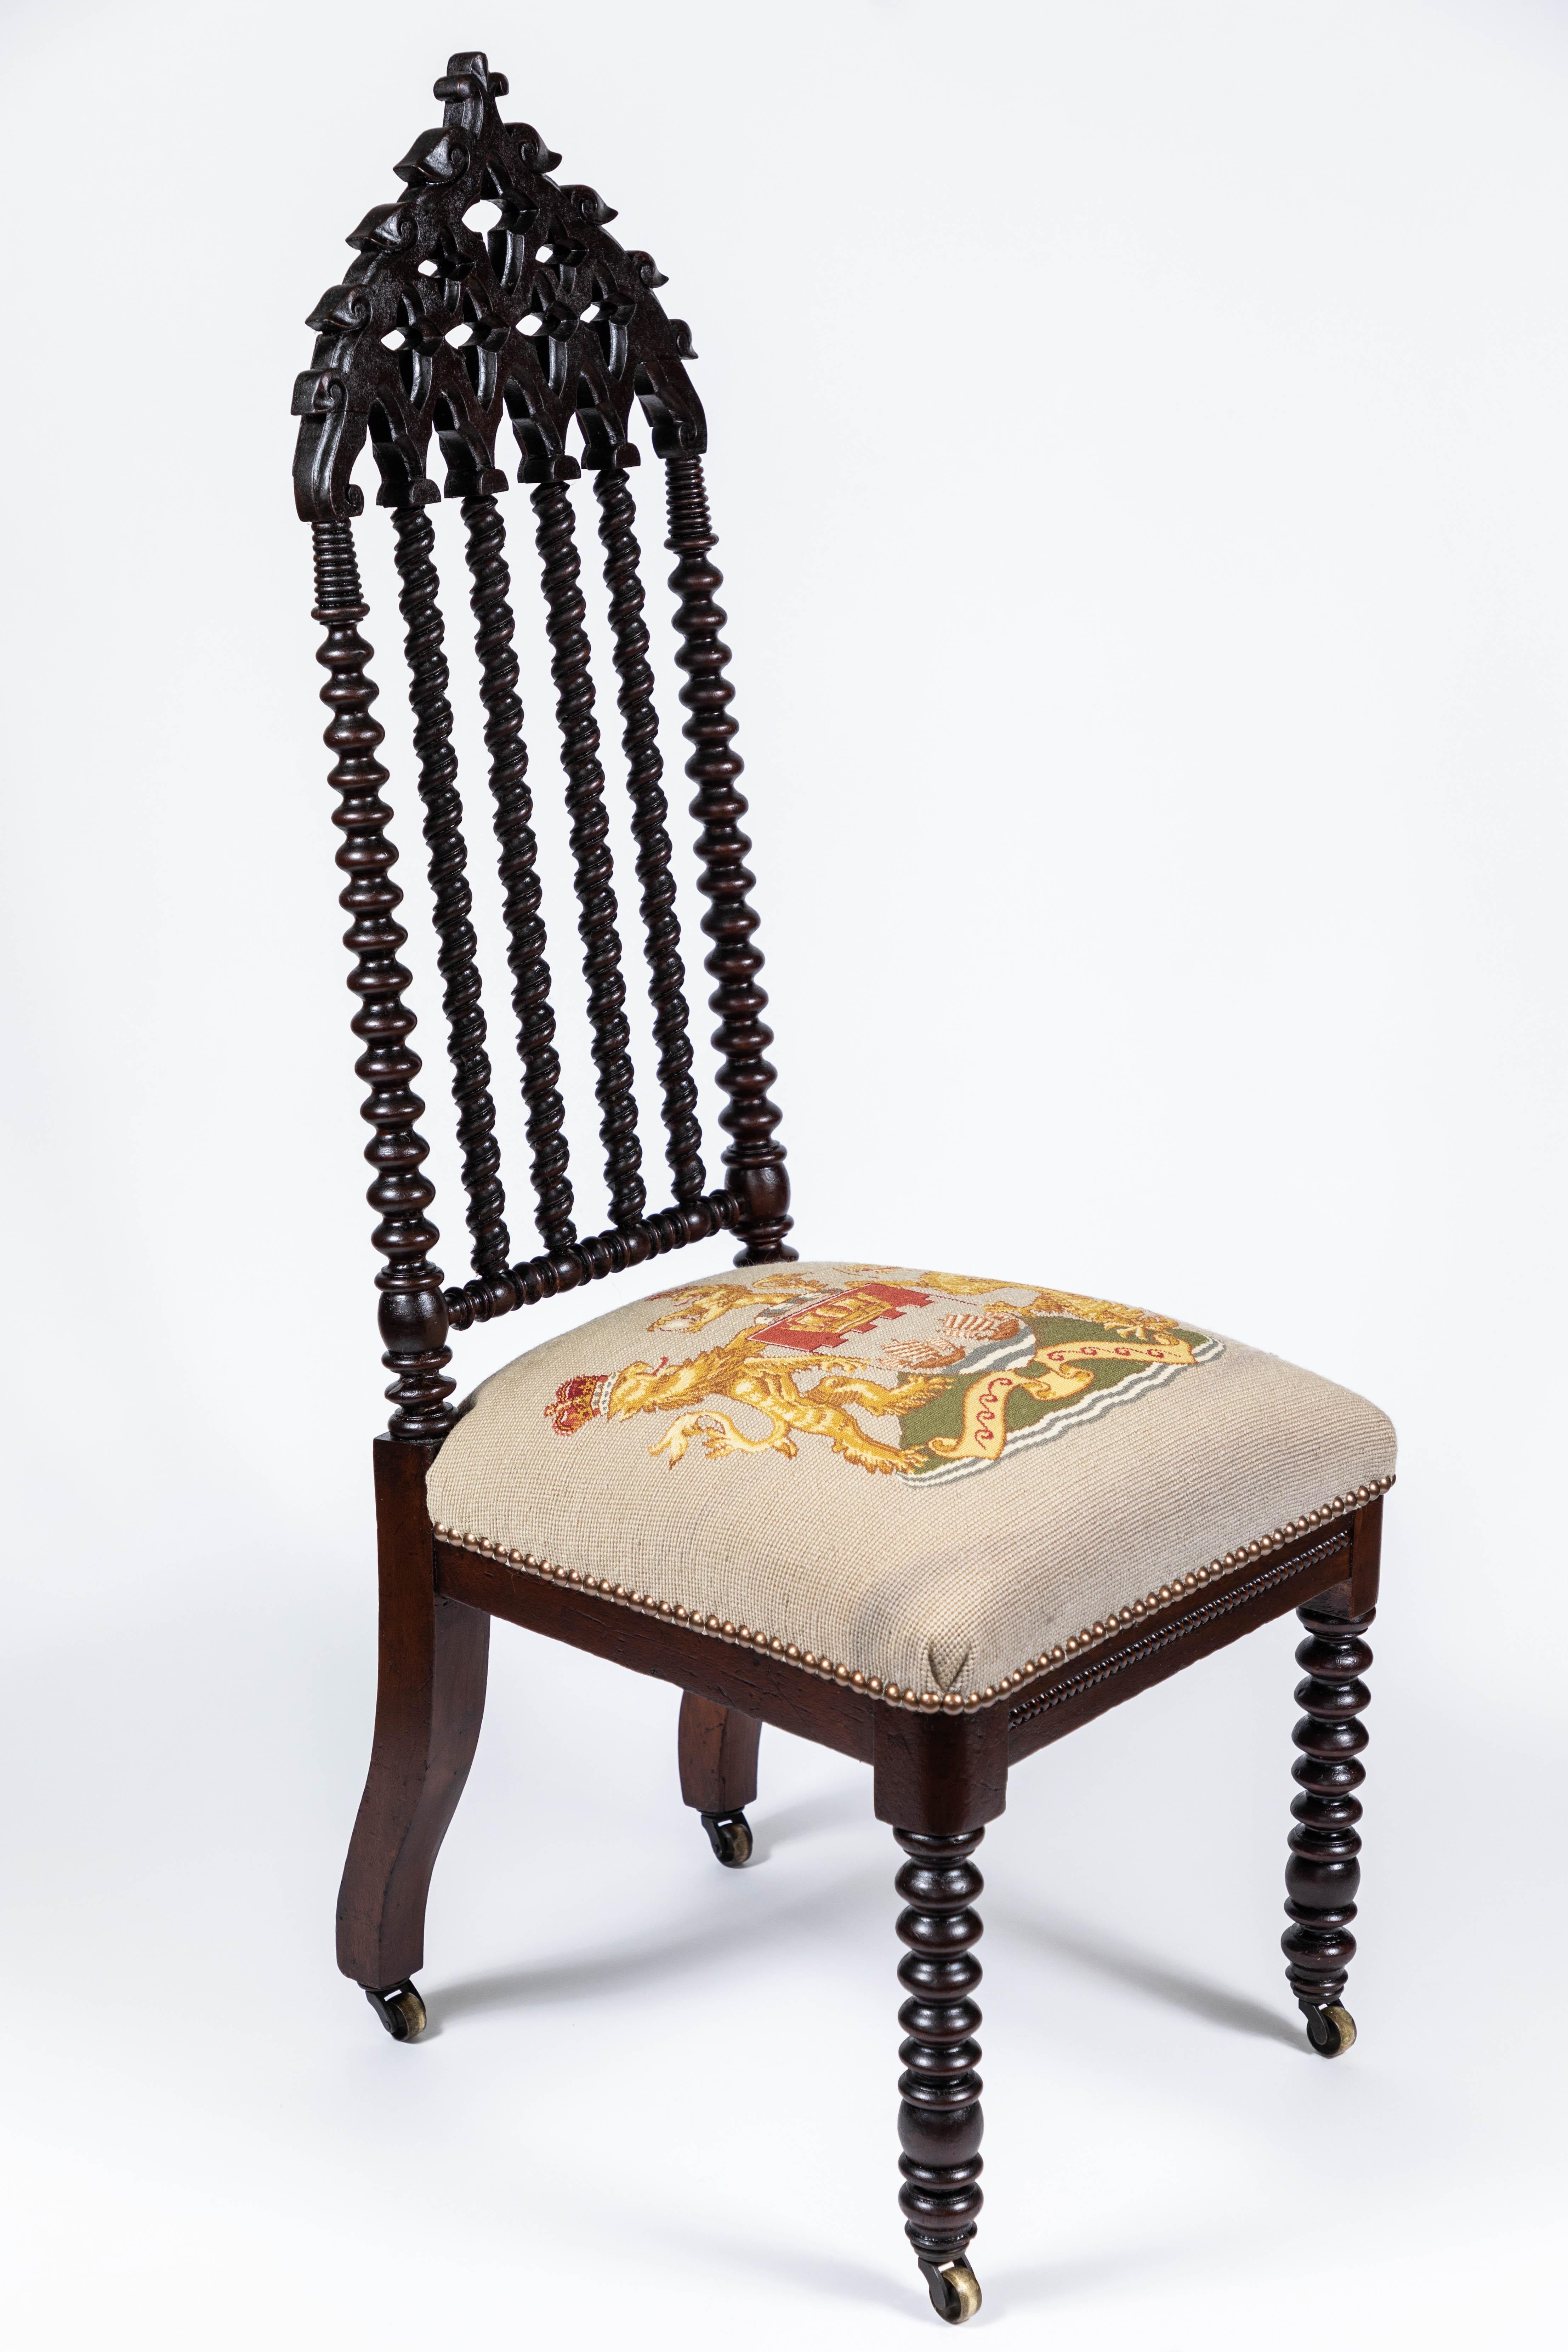 Antique 19th century Gothic Revival style chair with seat newly upholstered in a vintage needlepoint with crest & lions.